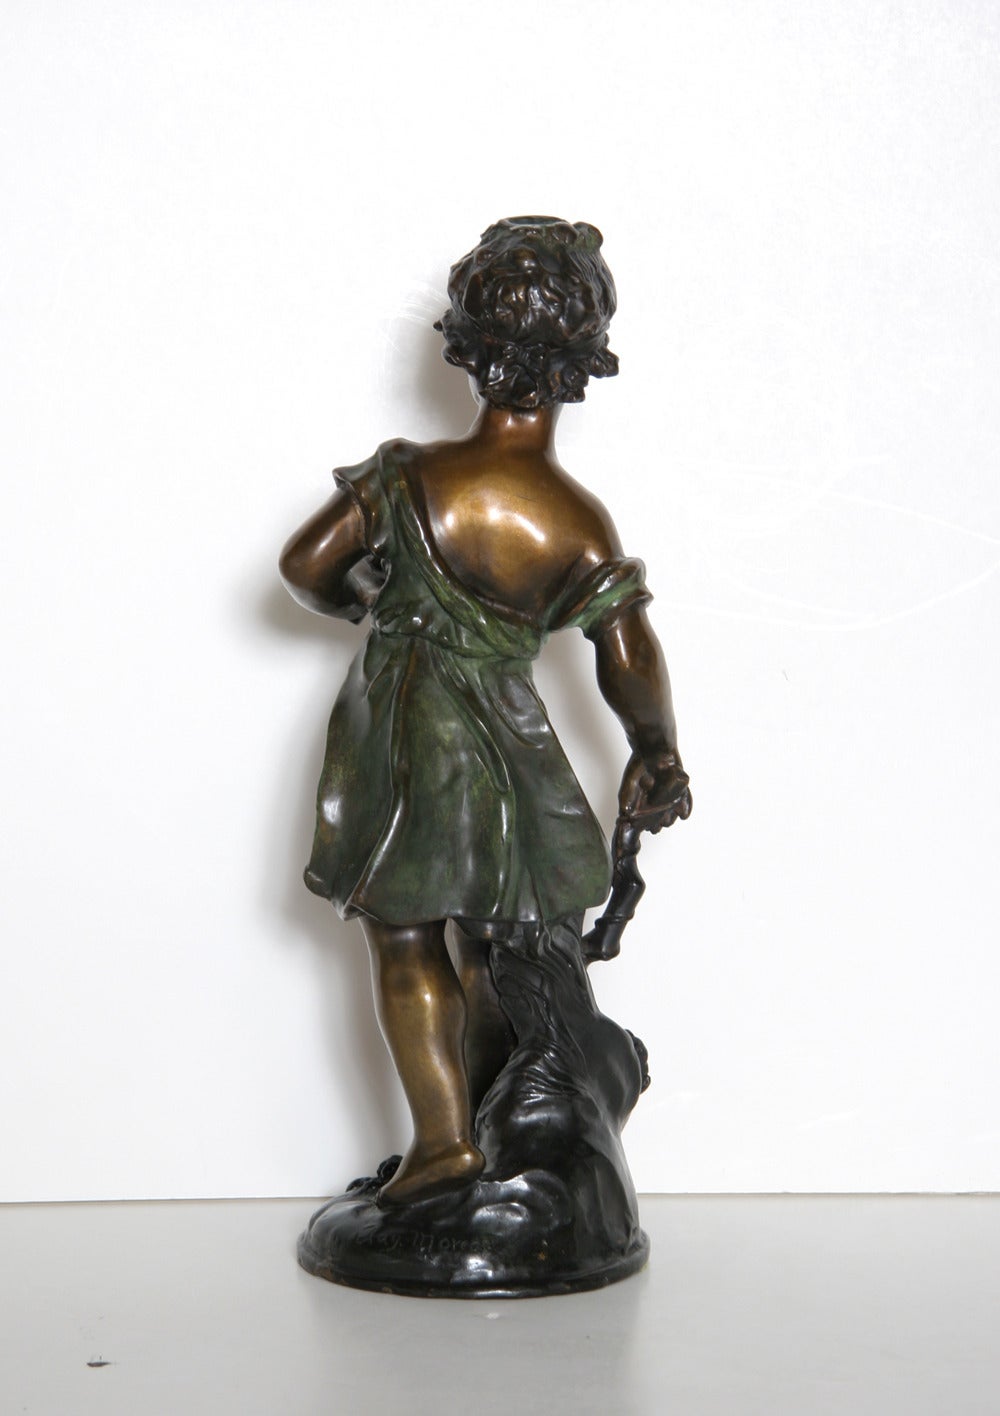 This bronze sculpture by Auguste Moreau is a beautiful work from the Romanticism period. Auguste was the third son of sculptor and painter Jean Baptiste Moreau.  In 1861, he made his debut at the Salon, where he would exhibit regularly until